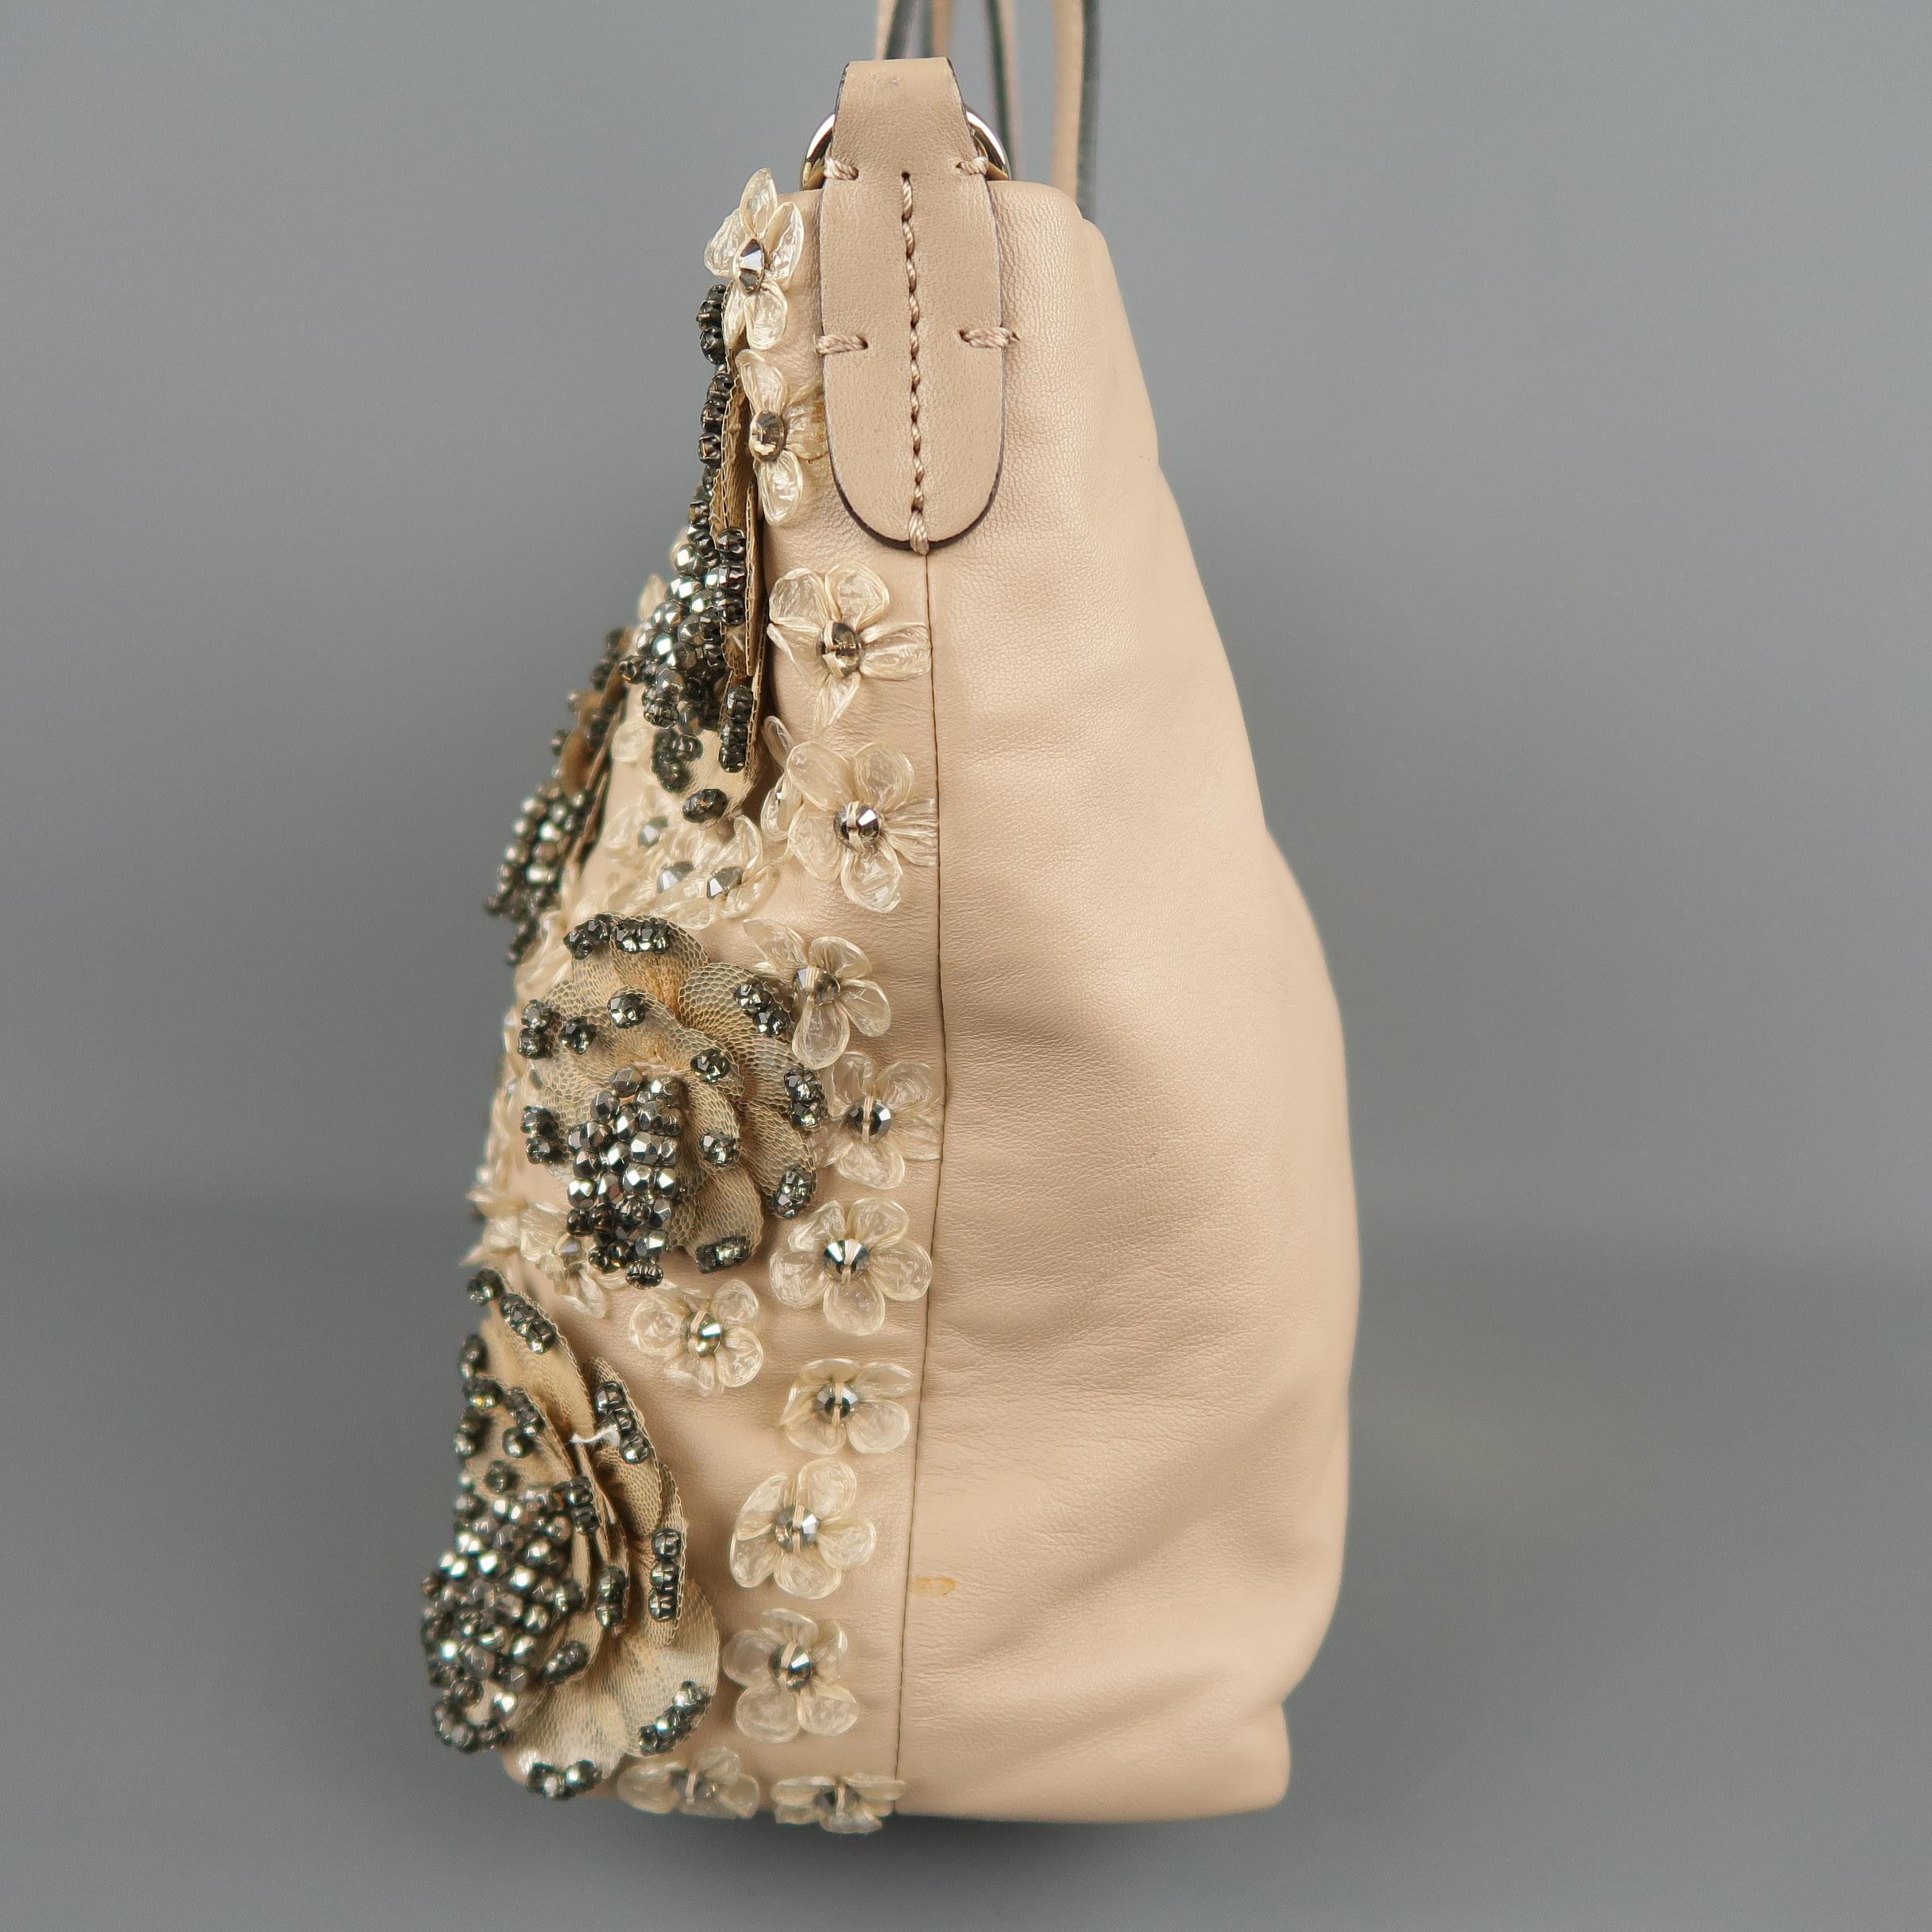 VALENTINO Muted Pink Leather Beaded Rhinestone Payette Flower Tote Bag 5